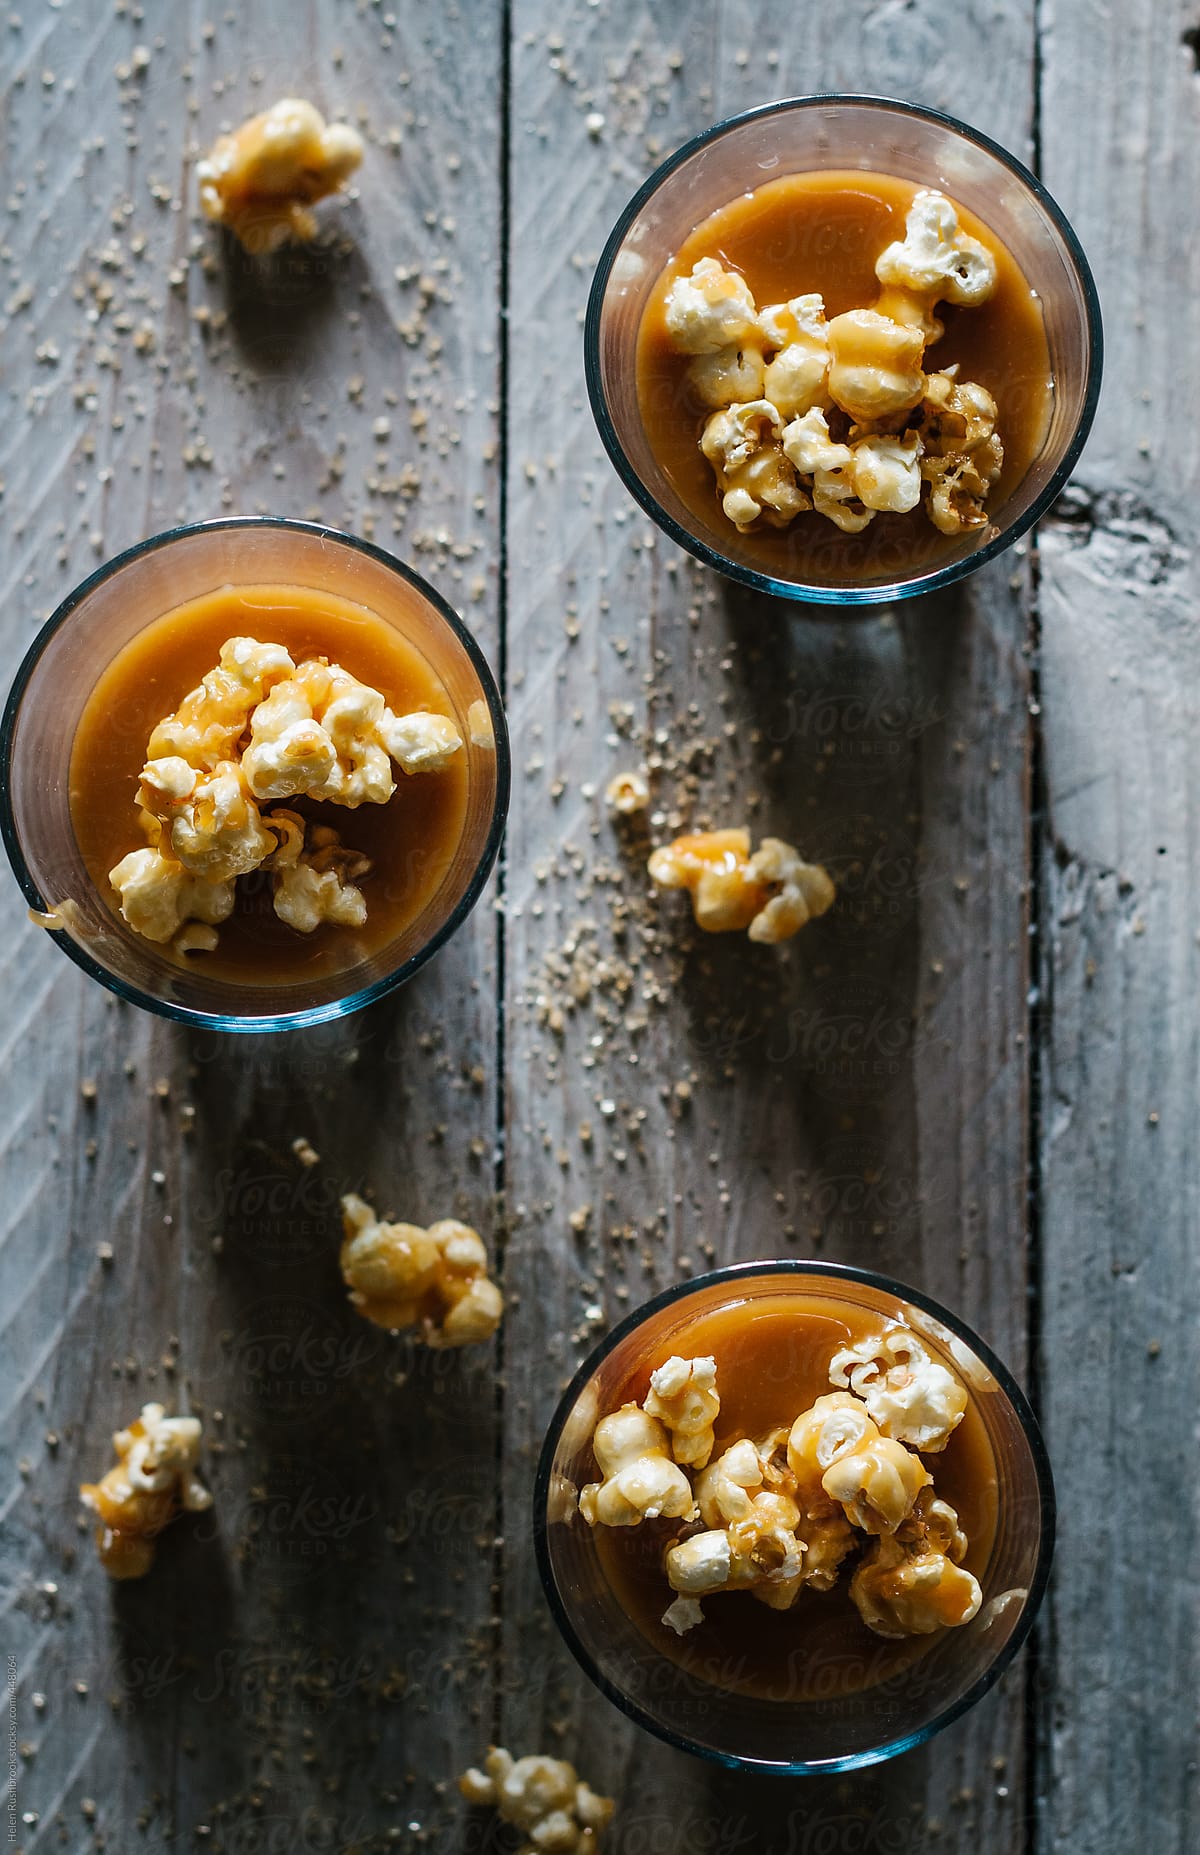 Chocolate Mousse with salted caramel sauce and toffee popcorn.